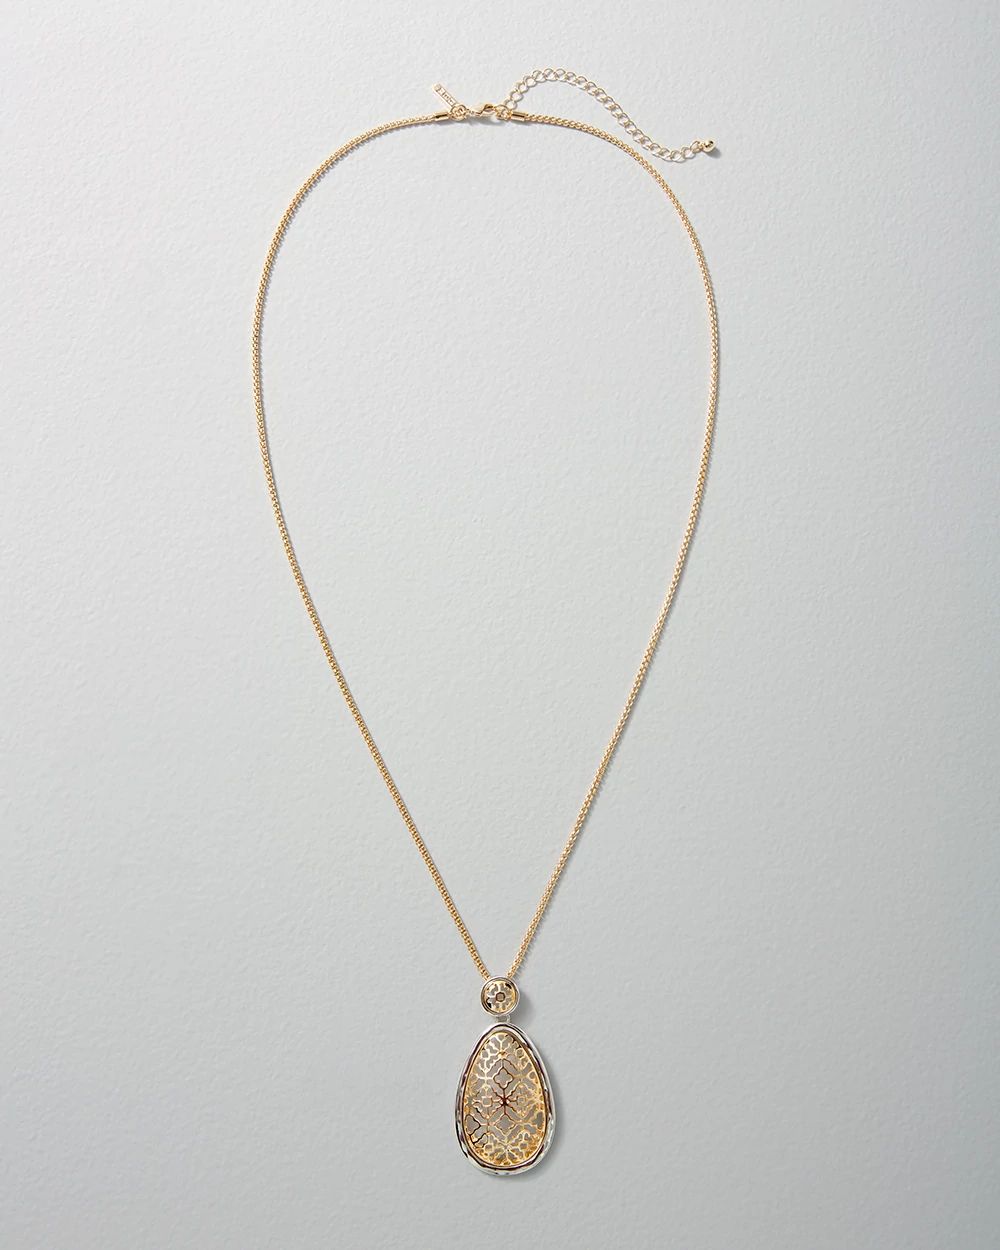 Goldtone + Silvertone  Pendant Necklace click to view larger image.